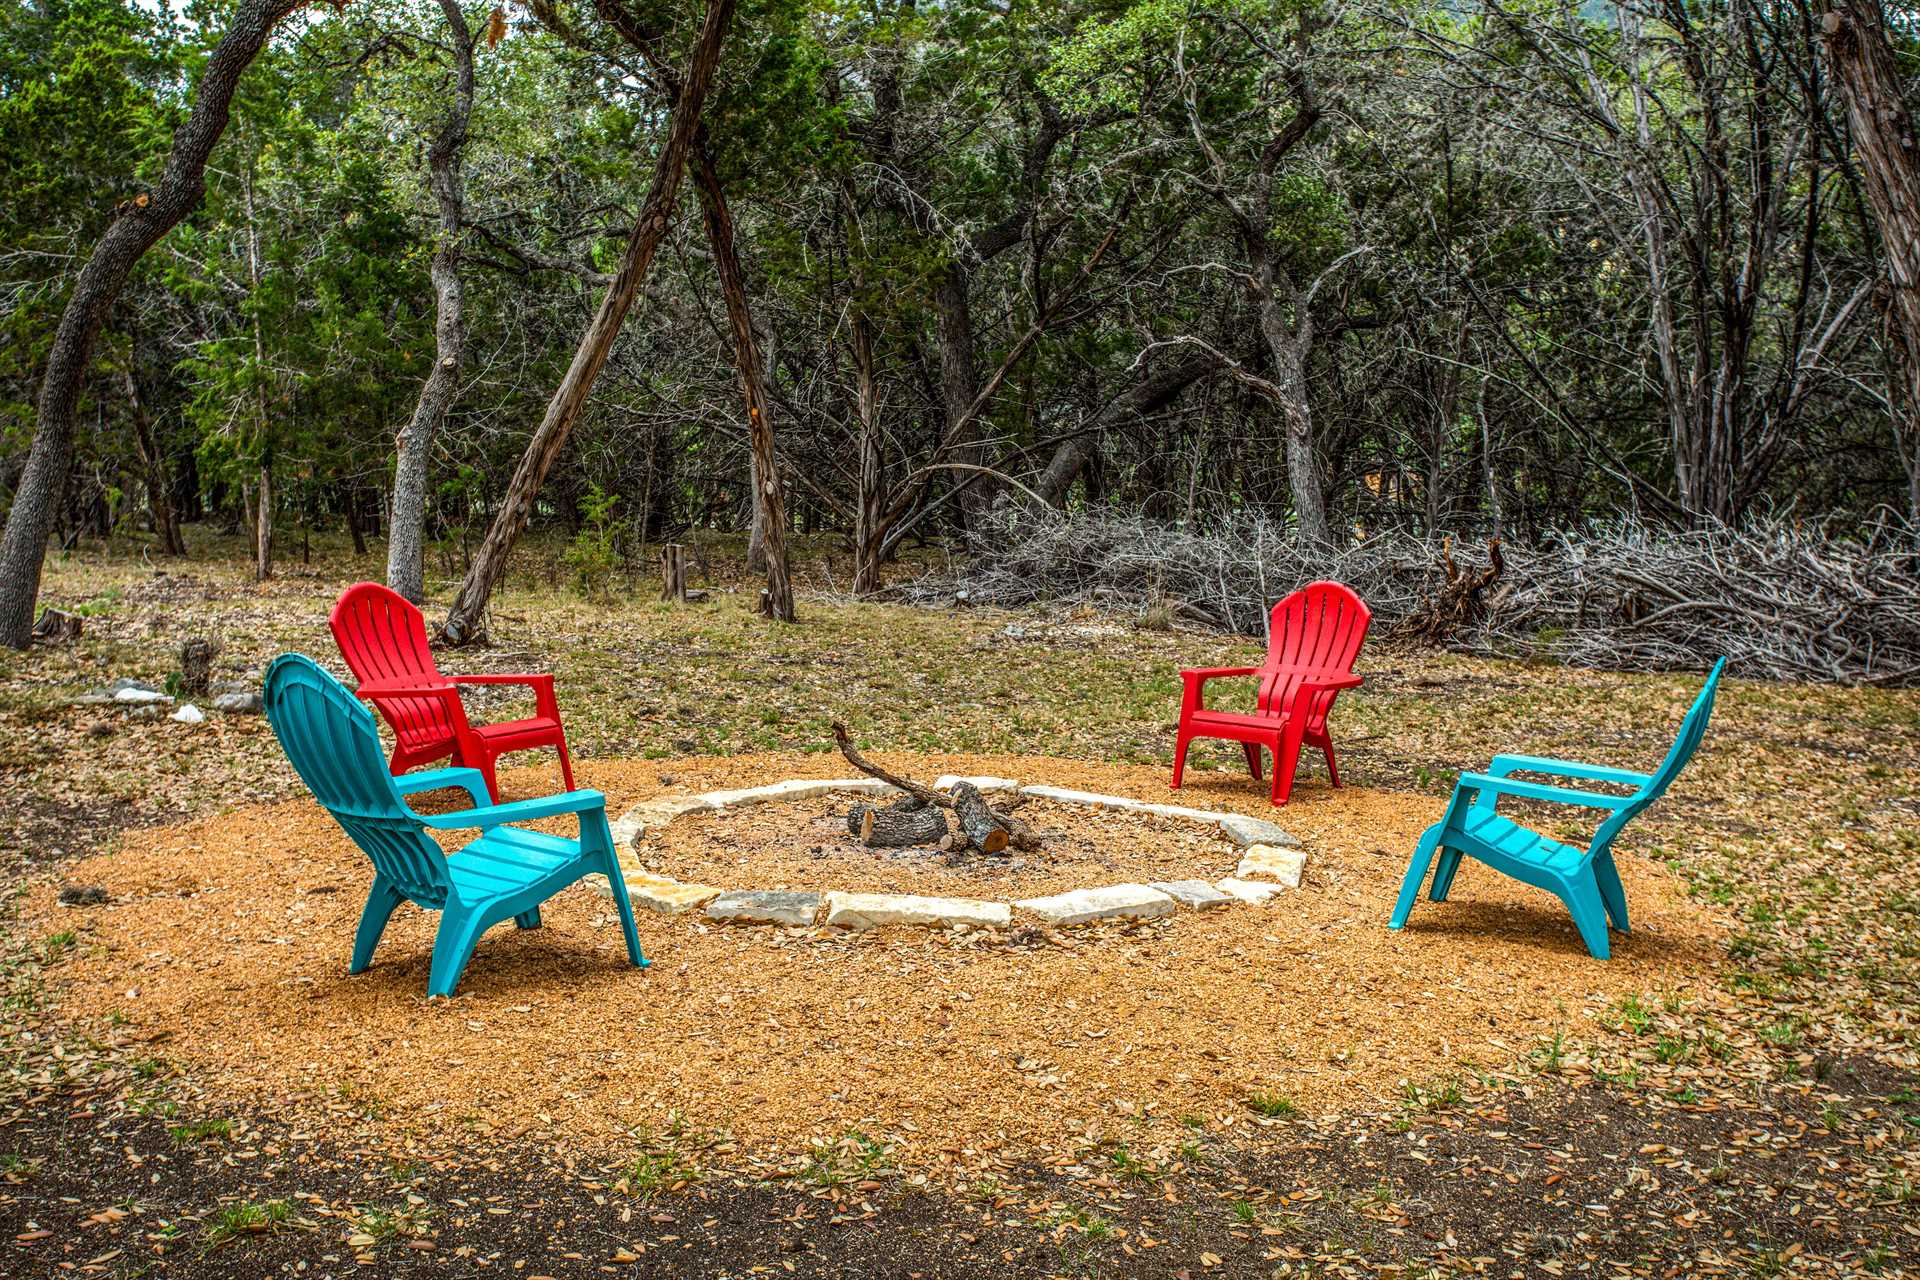                                                 Converse, snack, watch wildlife, and admire the starry night skies around the fire pit. Complimentary firewood is included!